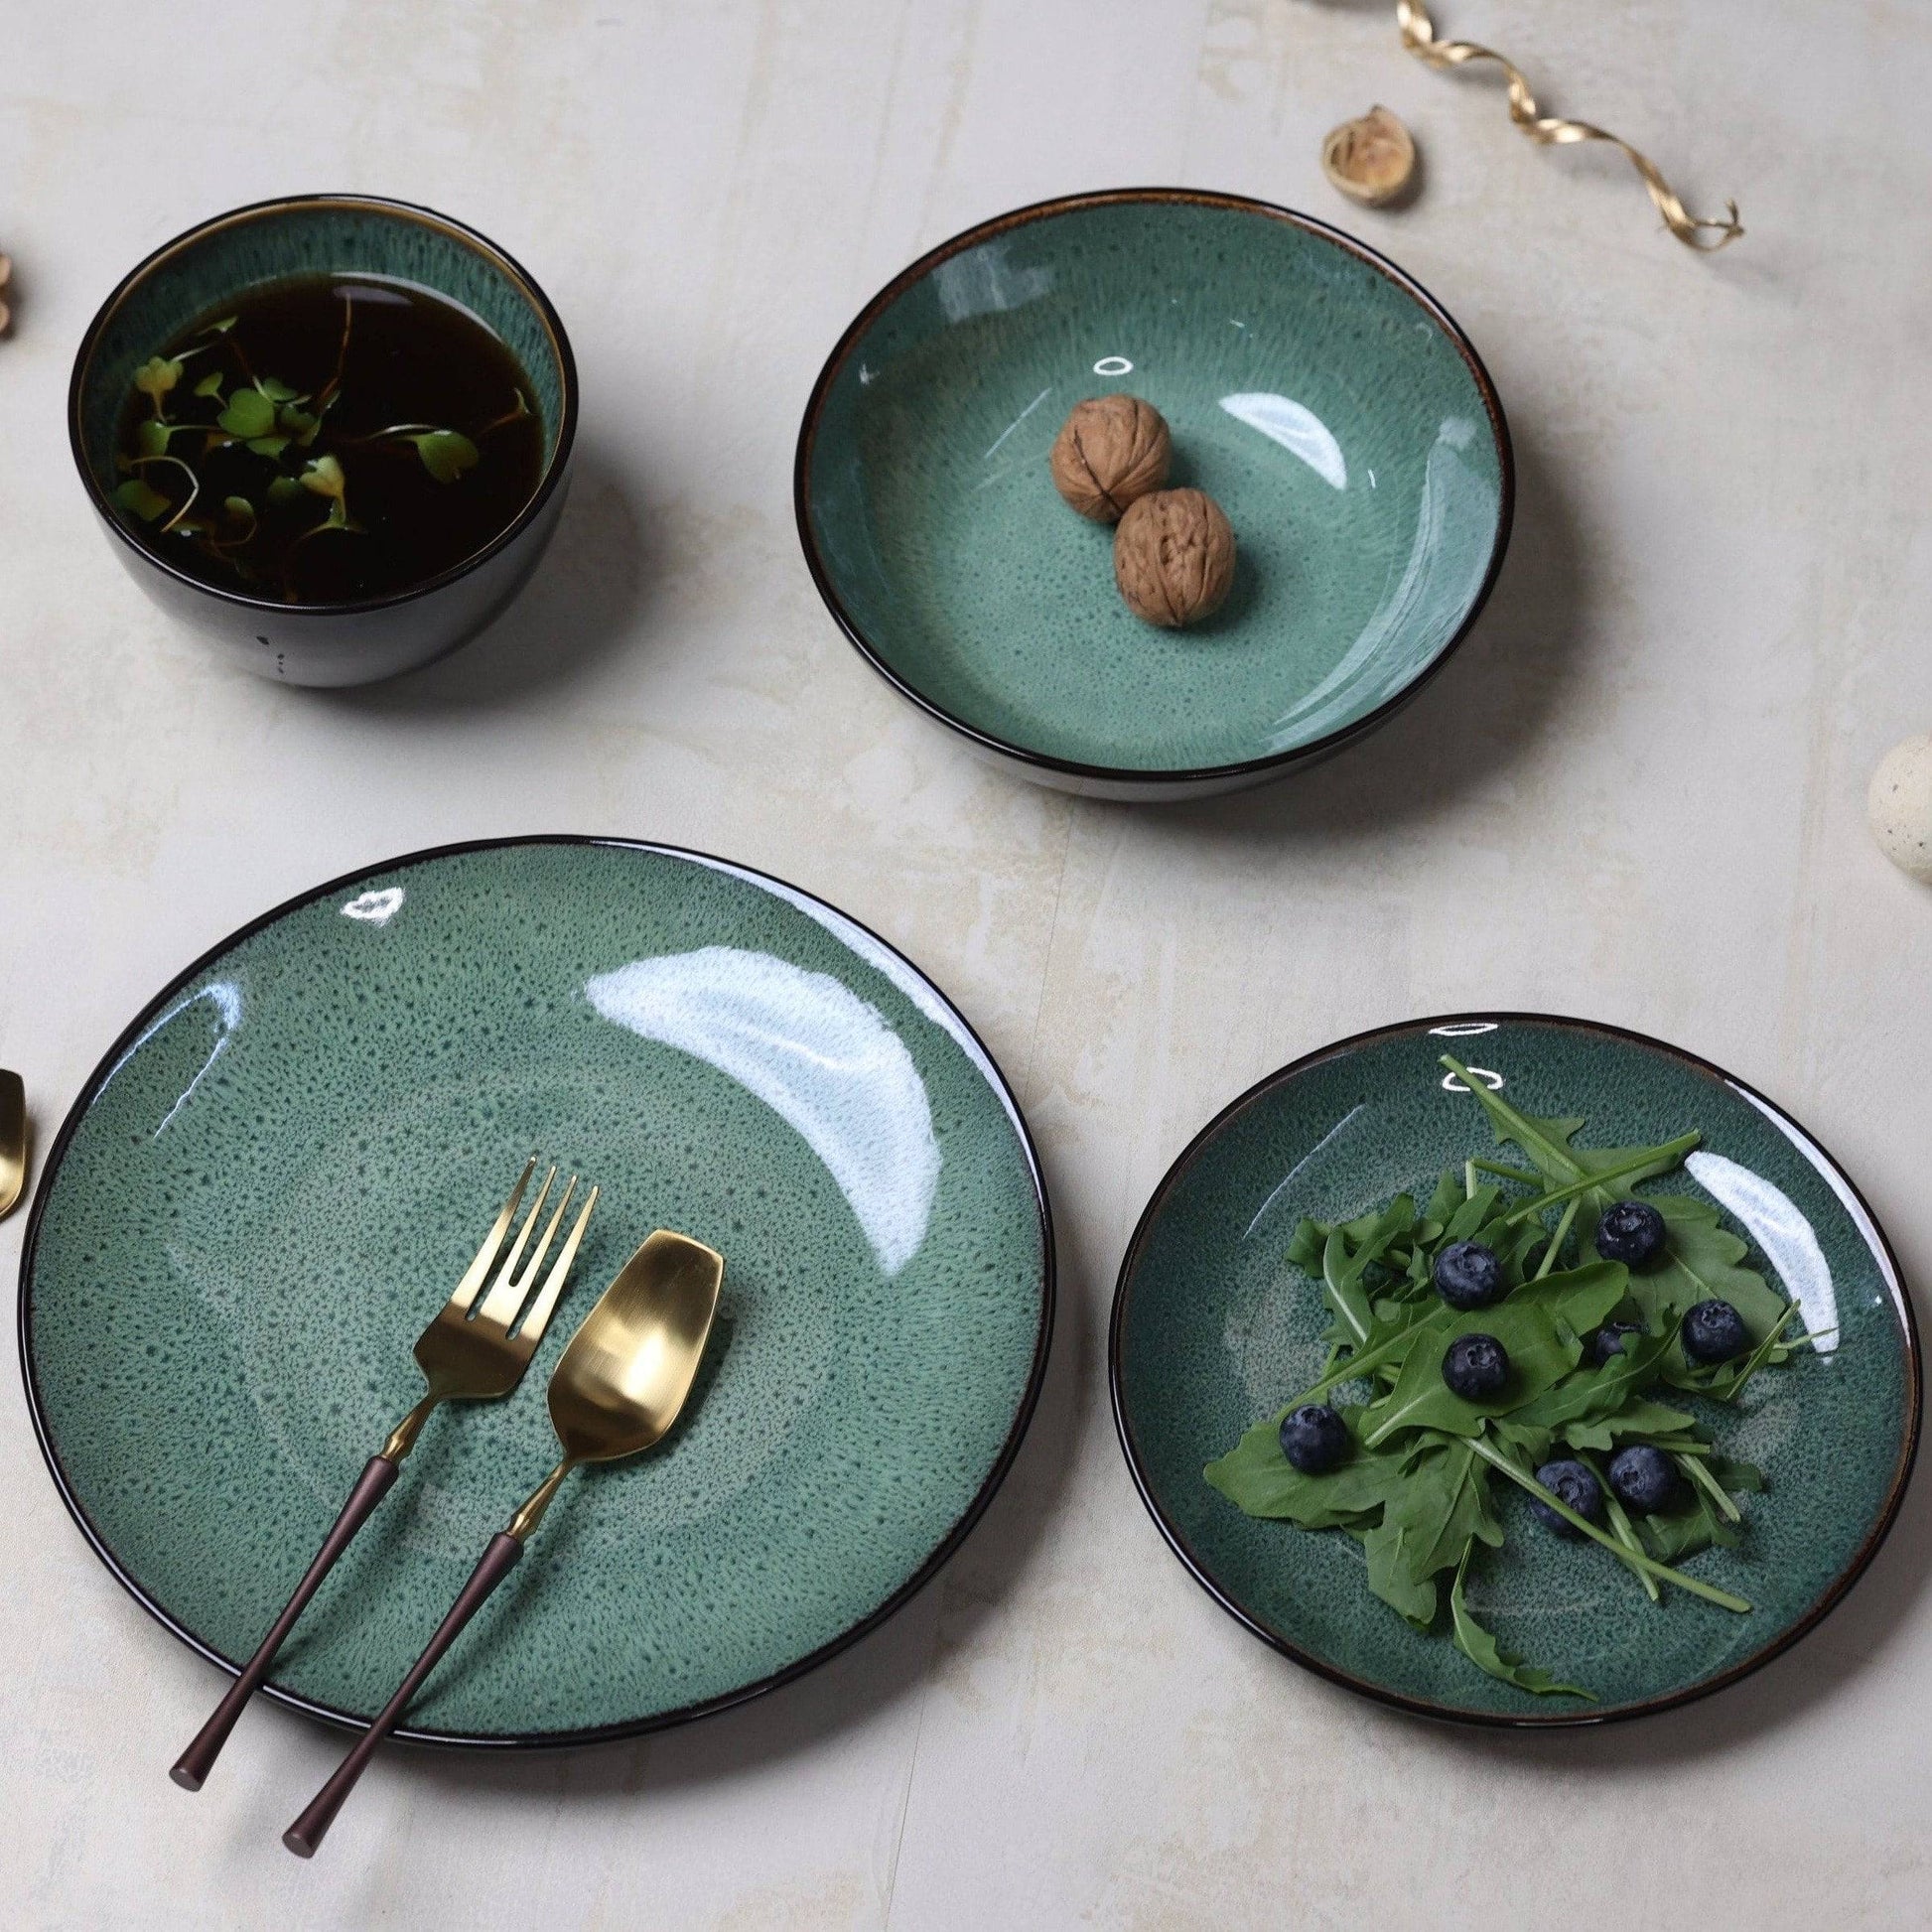 Luxury Inpensus round Green Starter Plate - The Decor Circle